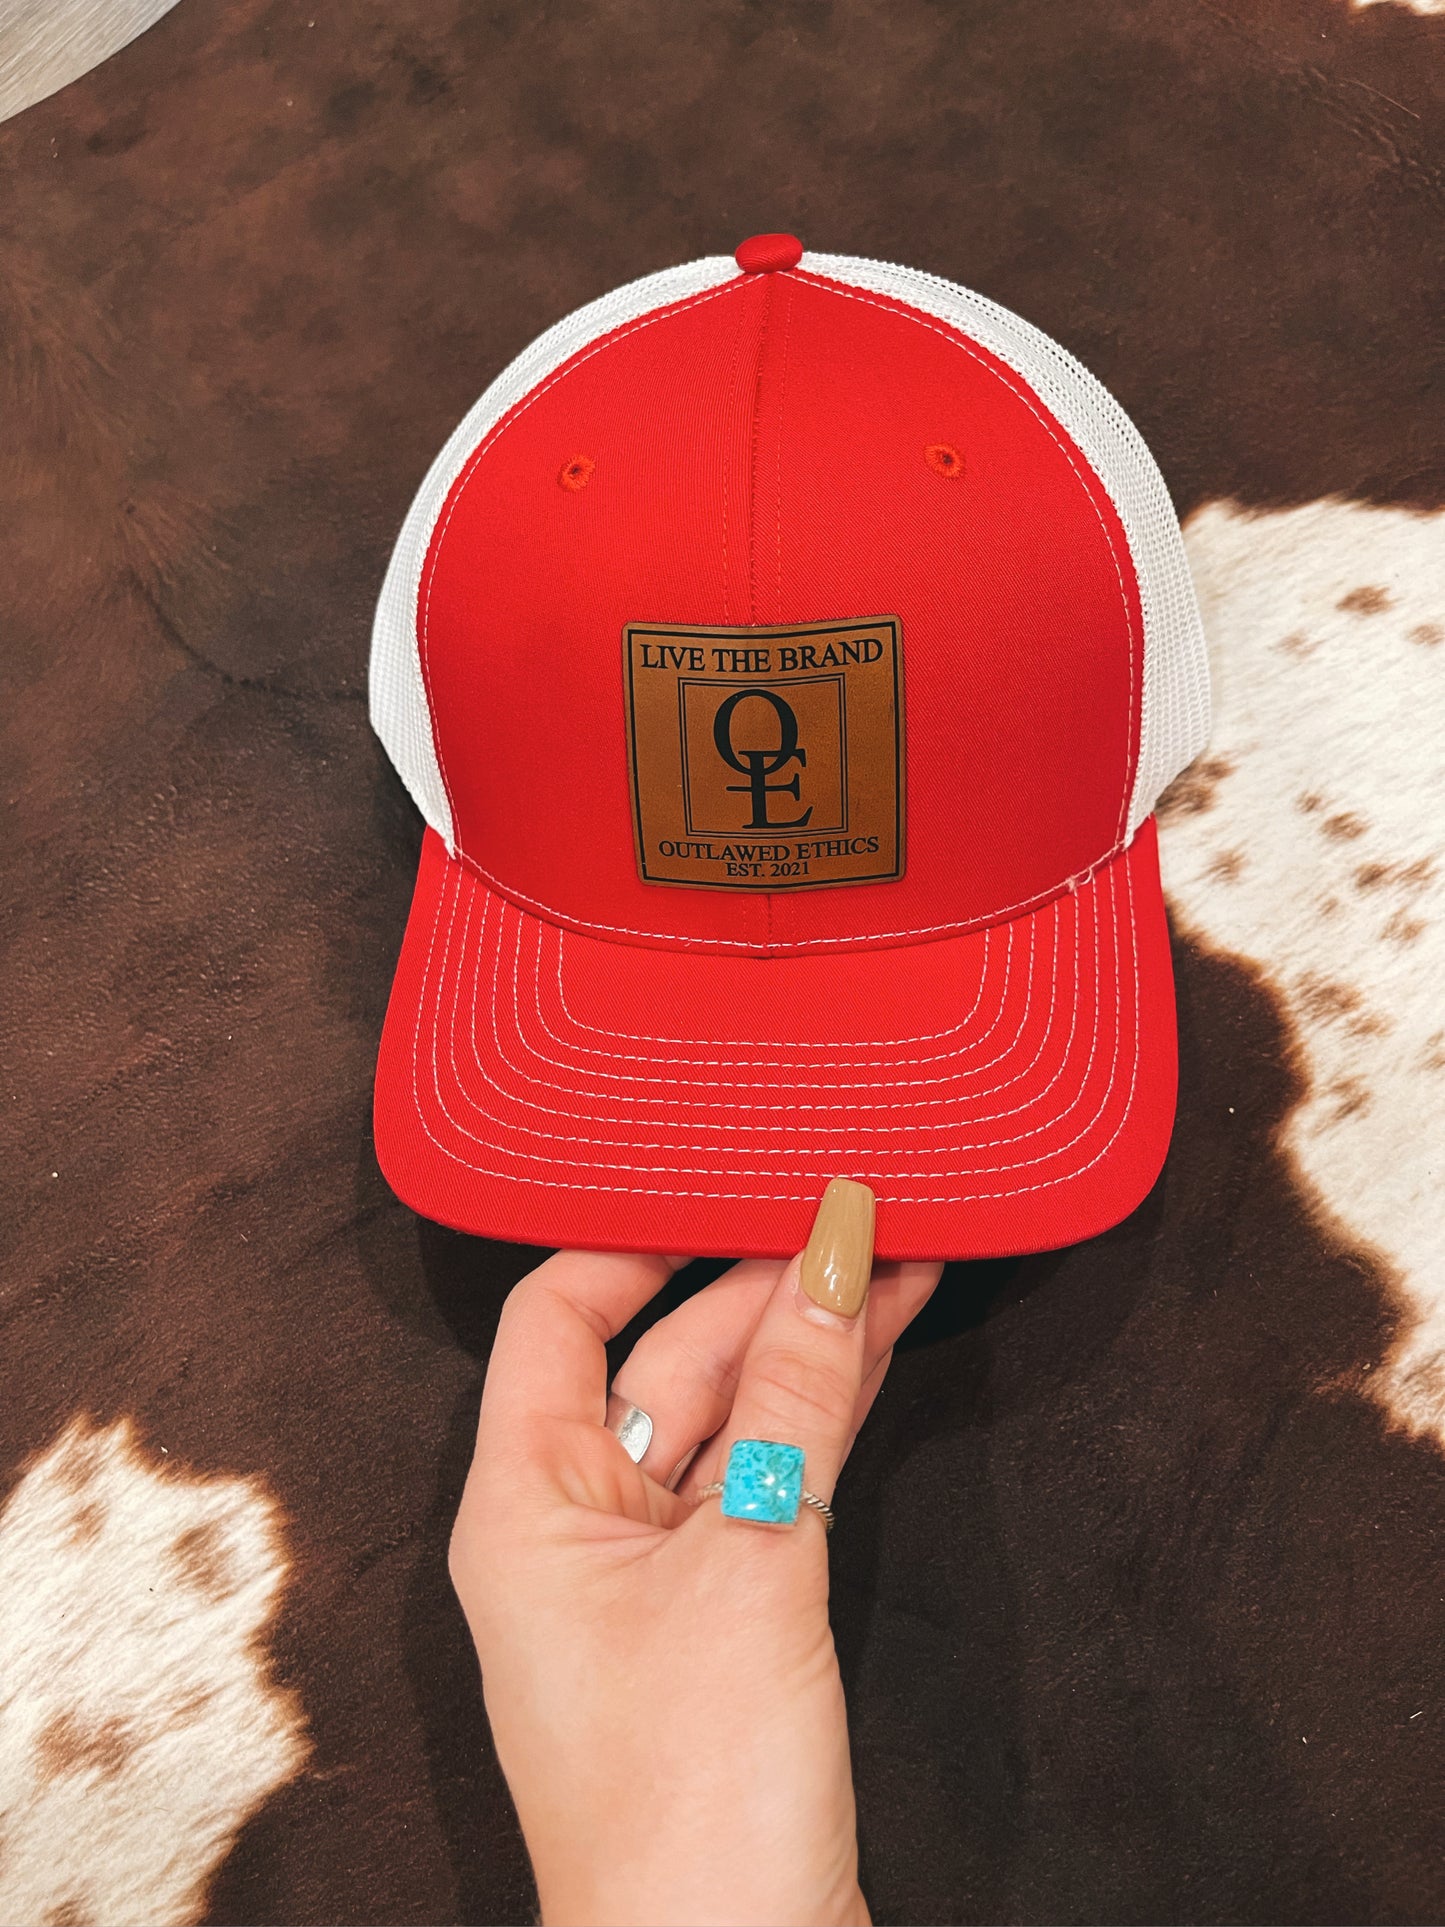 Red/White OE Brand hat